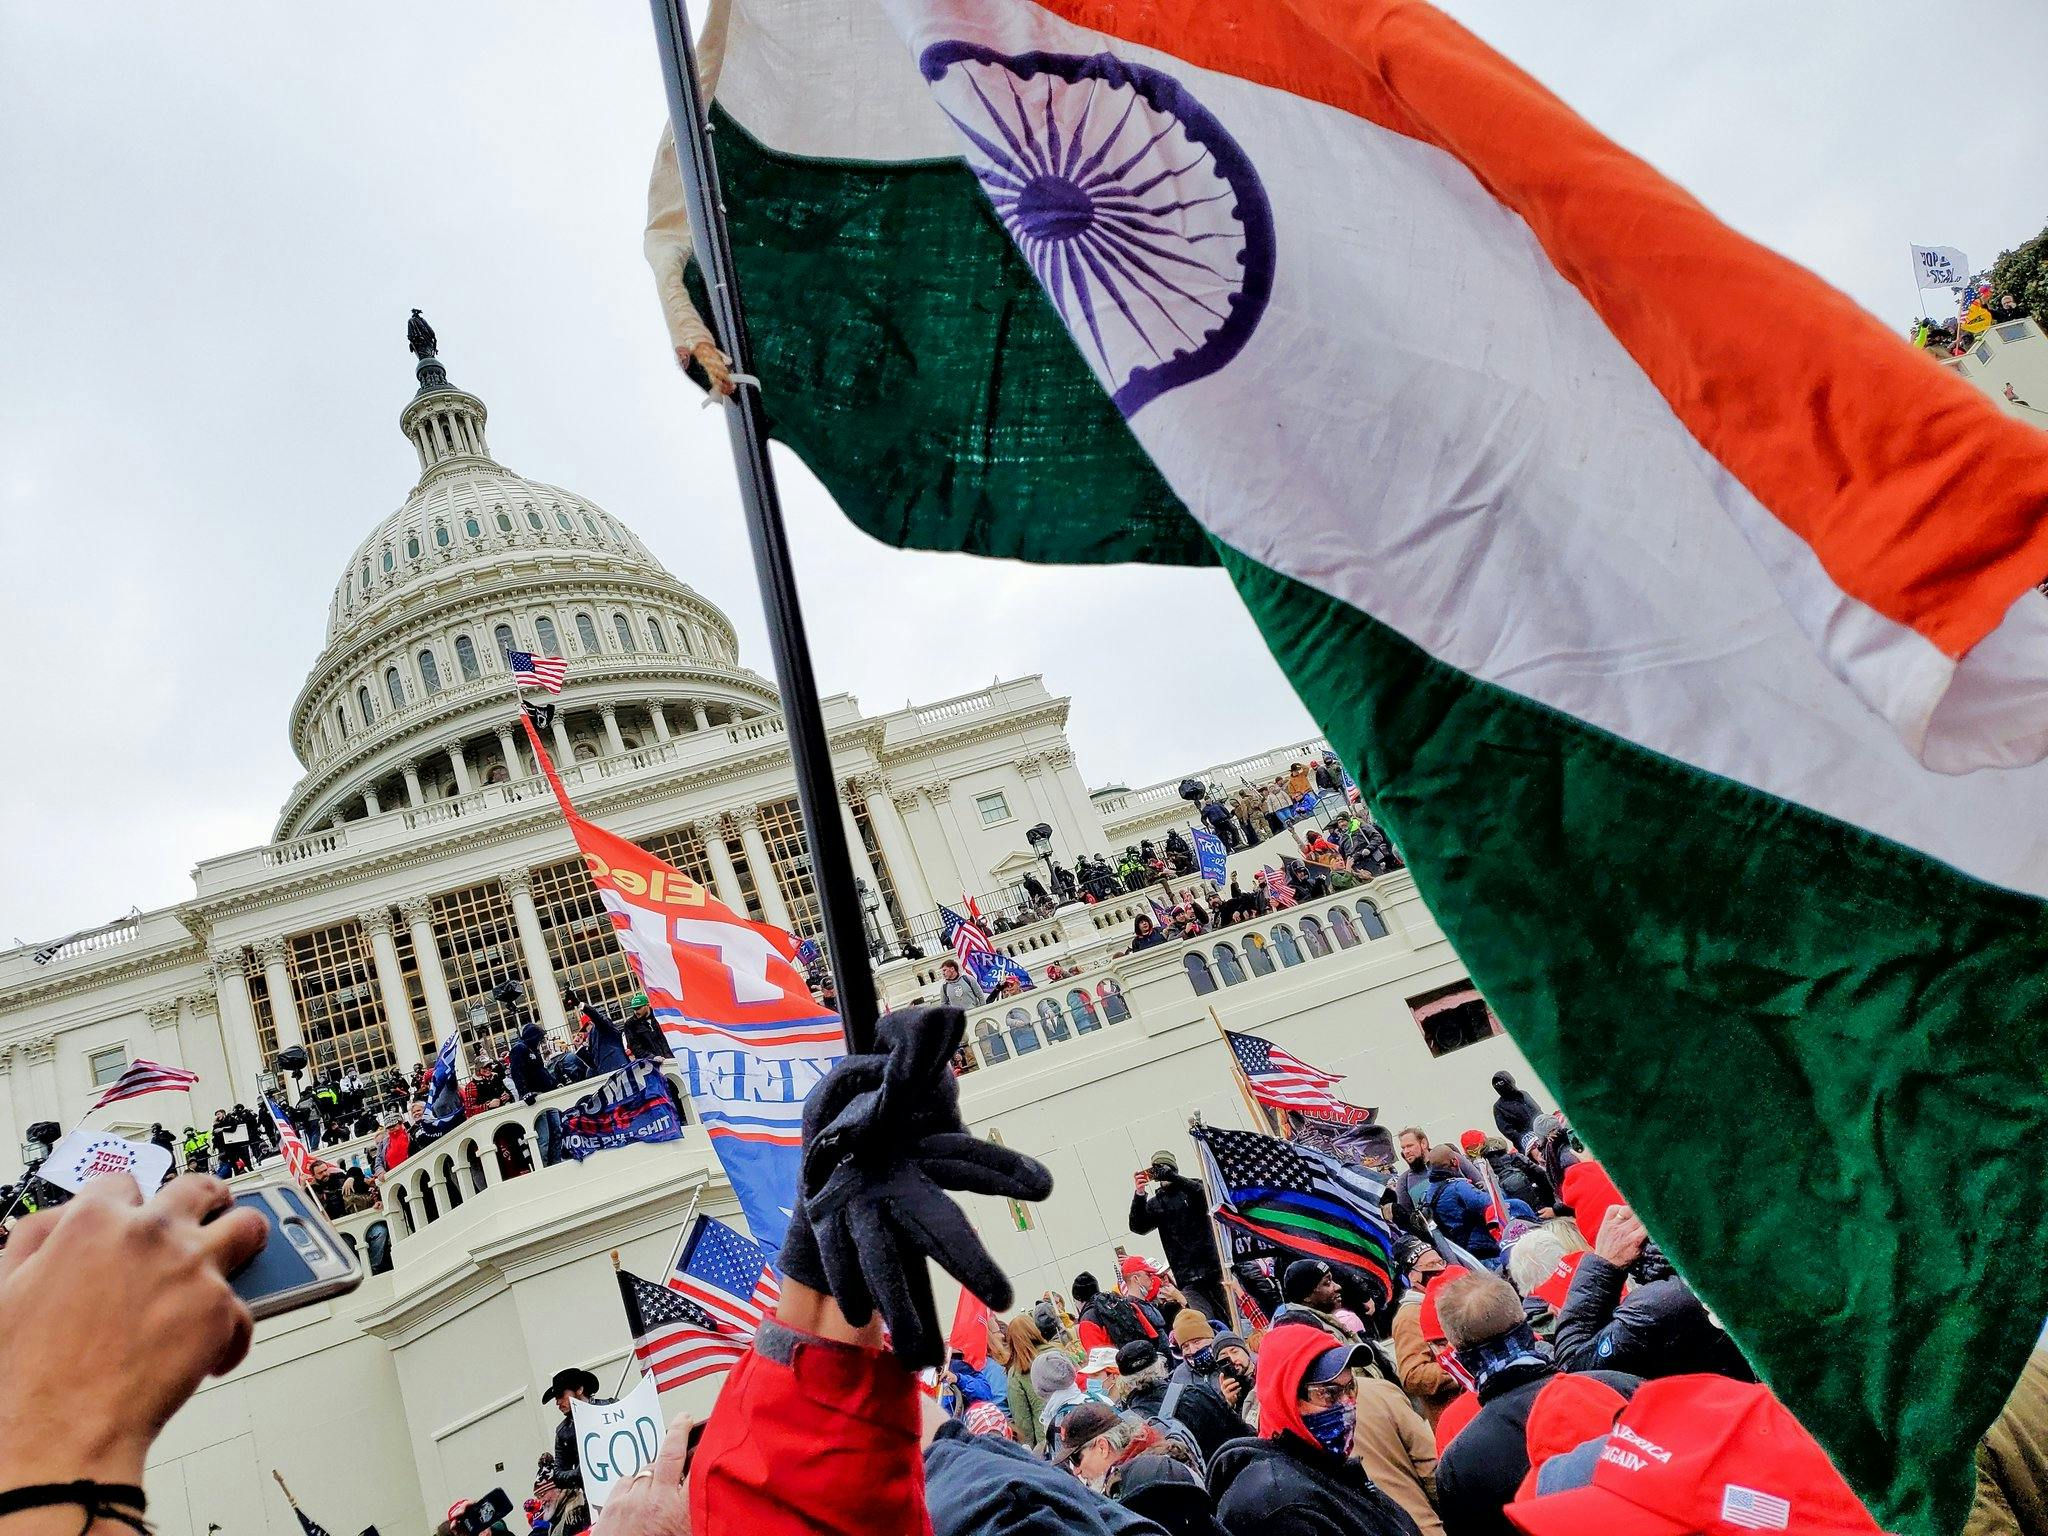 The Indian Flag at Capitol Hill on January 6, 2021 (via Twitter)